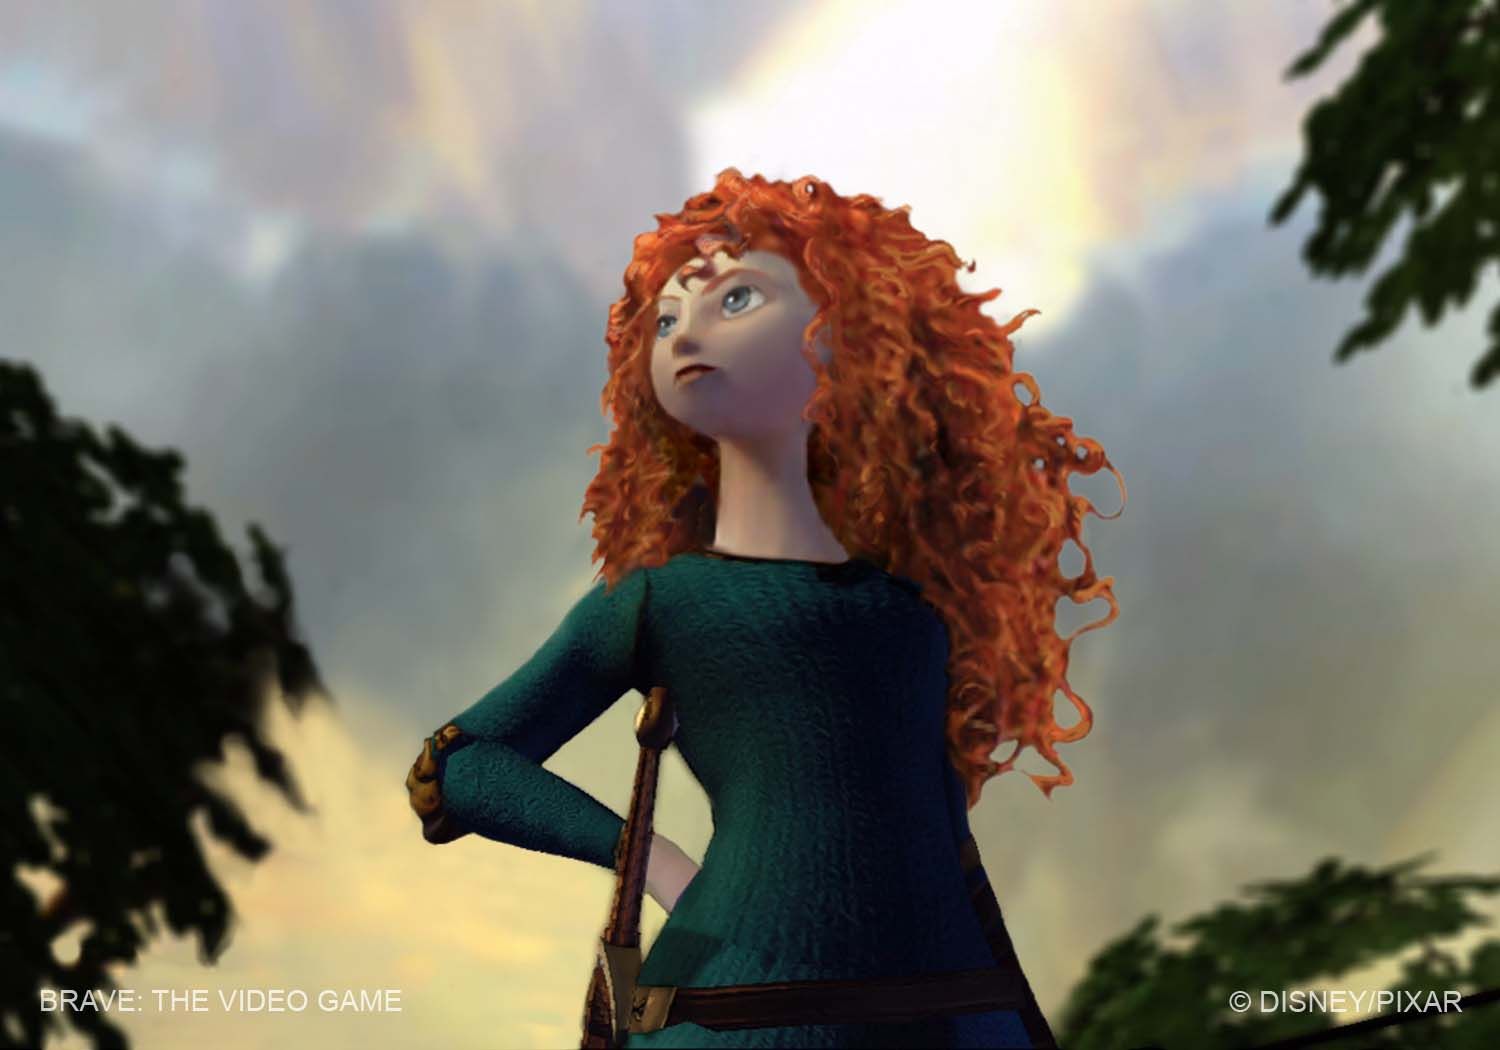 Brave: The Video Game' review